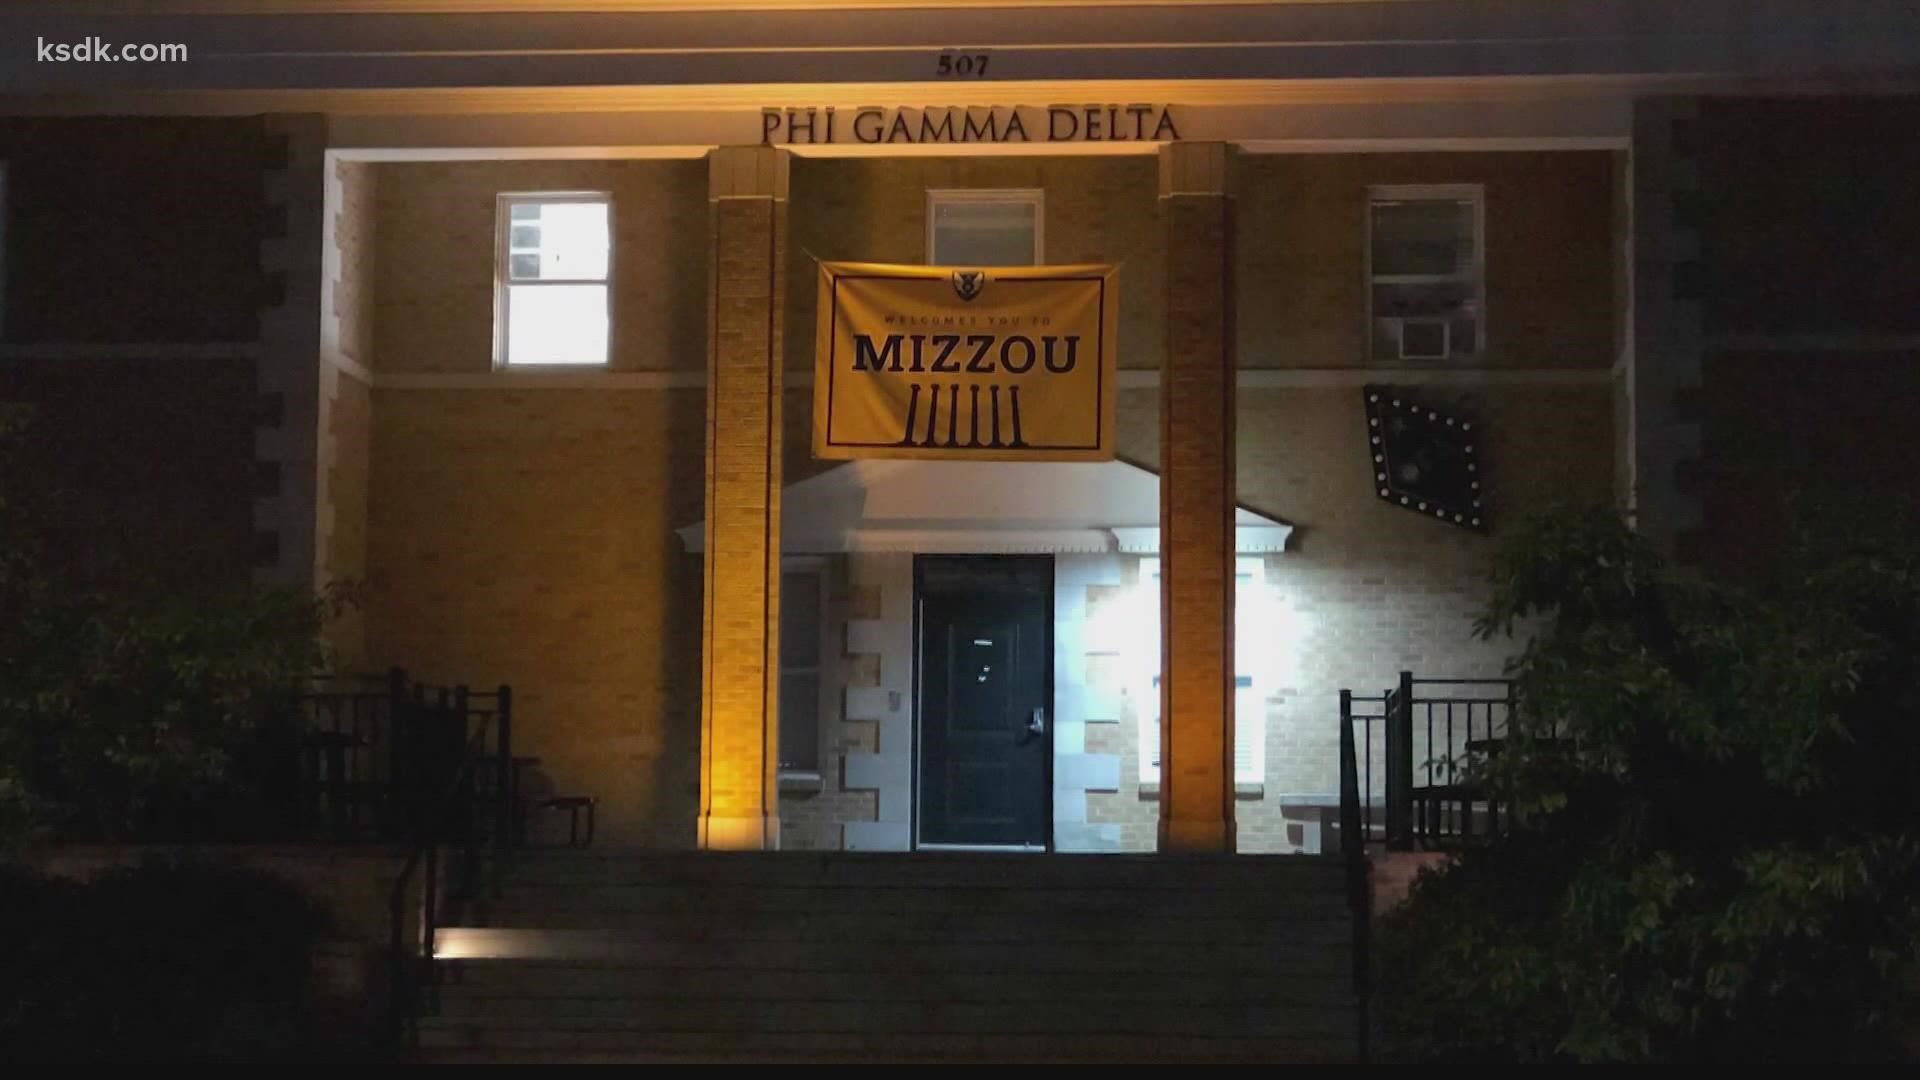 Fraternity activities were originally suspended on Oct. 20 after a freshman member of Phi Gamma Delta was hospitalized with suspected alcohol poisoning